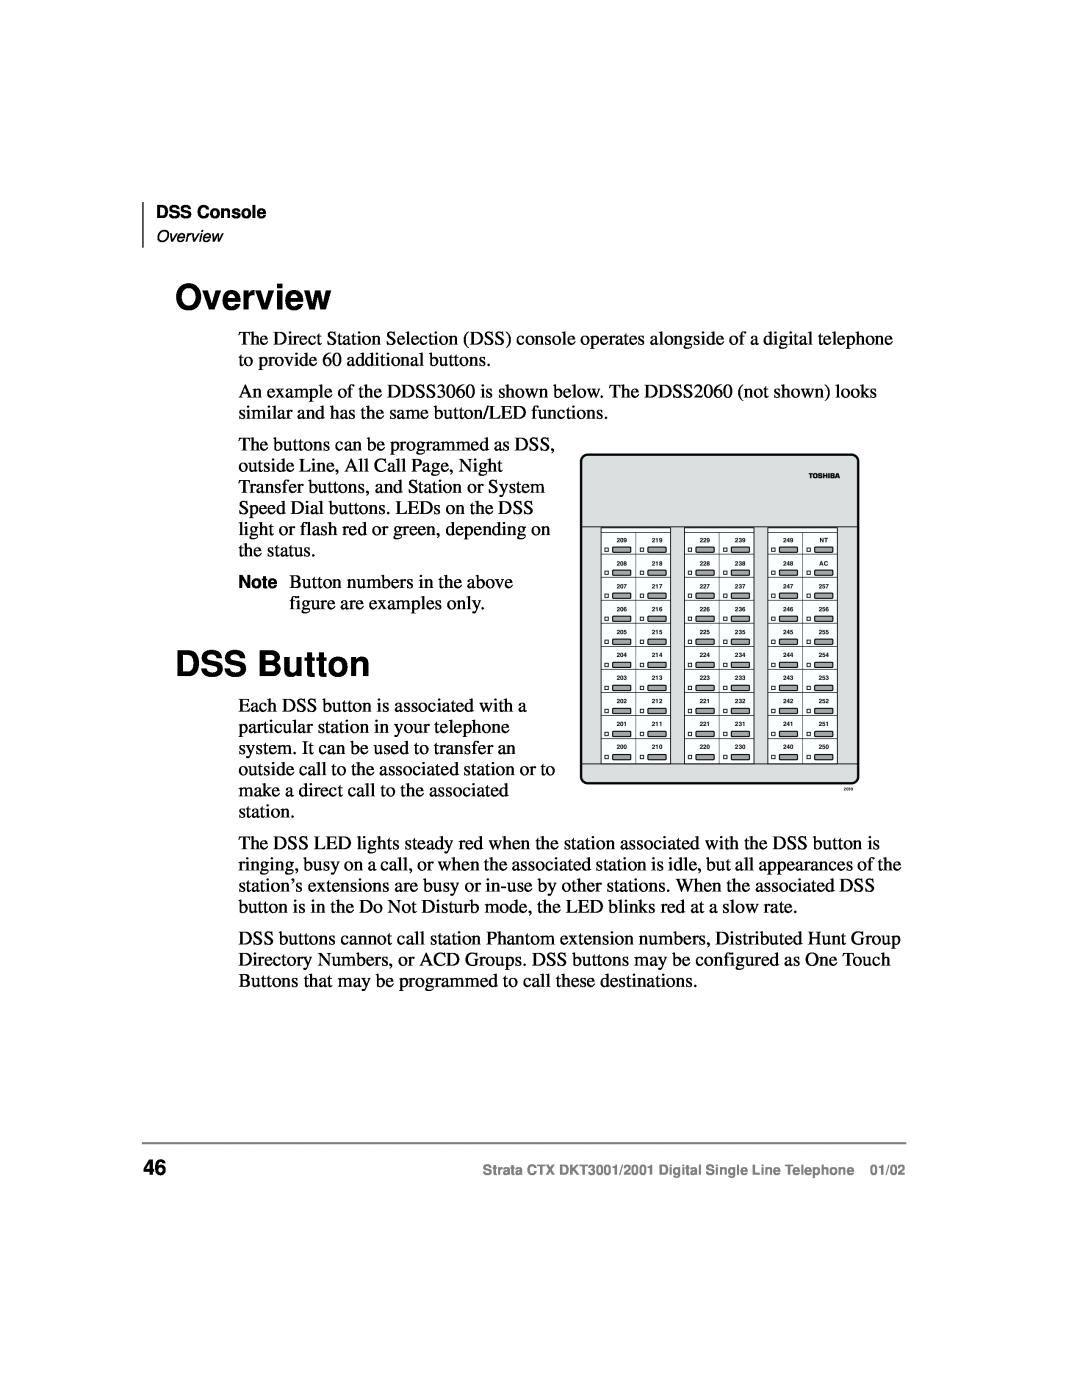 Toshiba DXT3001, 2001 manual Overview, DSS Button 